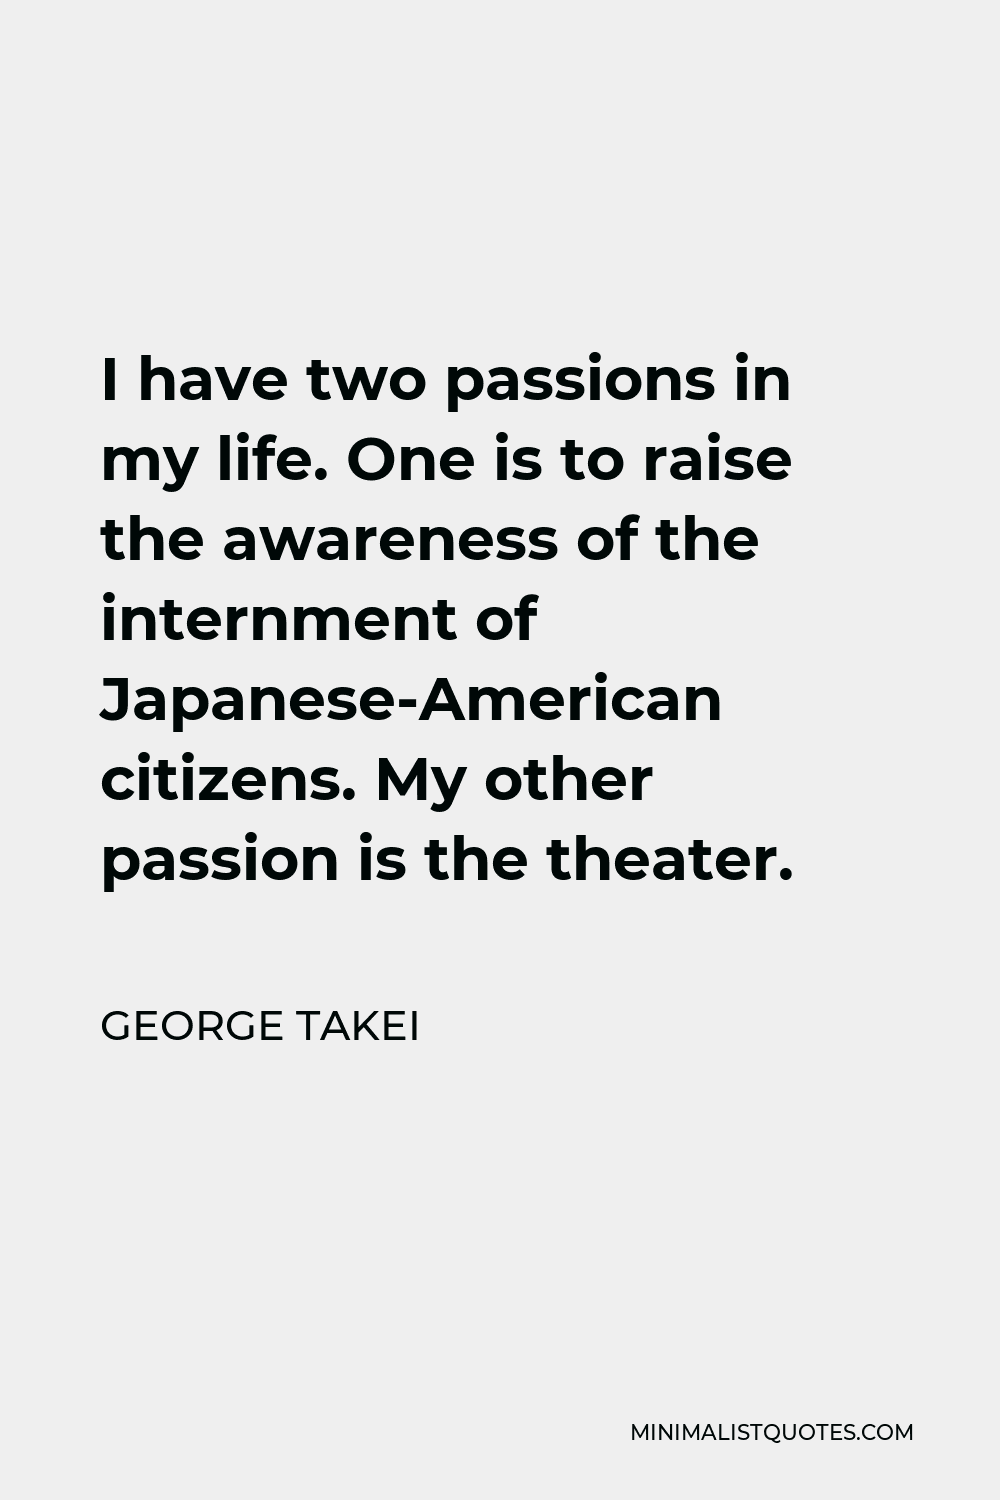 George Takei Quote - I have two passions in my life. One is to raise the awareness of the internment of Japanese-American citizens. My other passion is the theater.